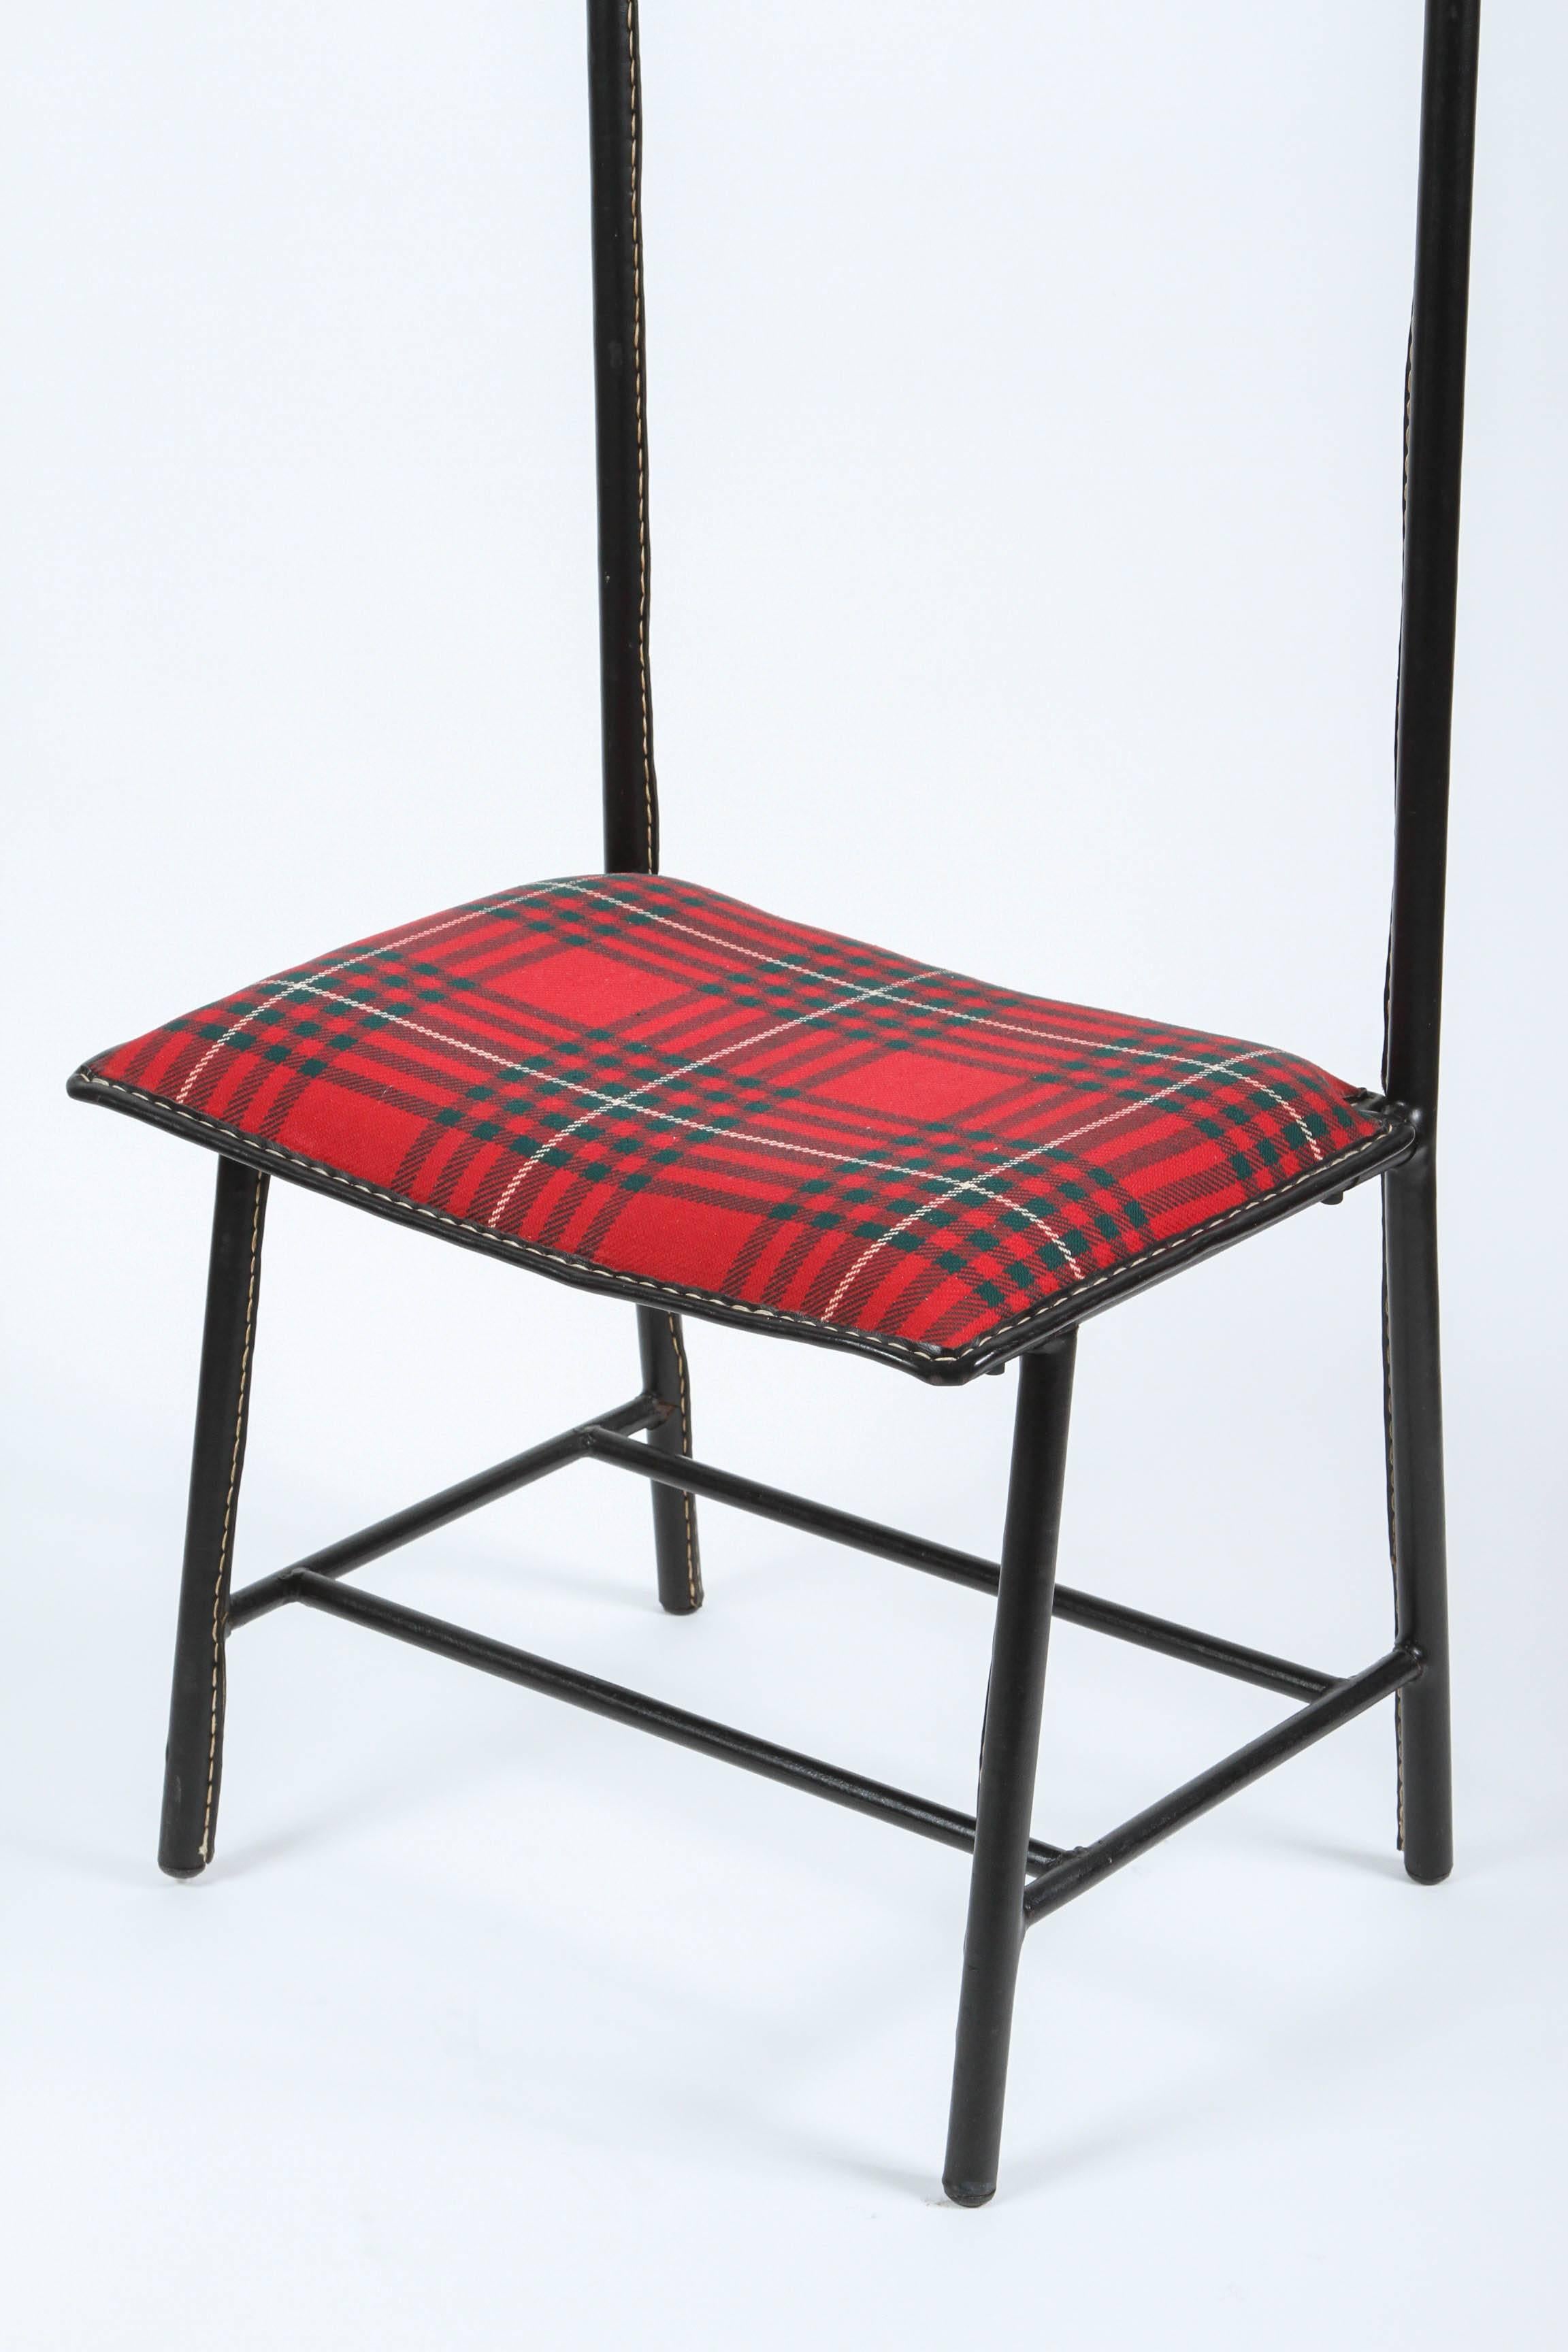 French Jacques Adnet For Hermes Valet Leather Wrapped Original Tartan Plaid Upholstery For Sale